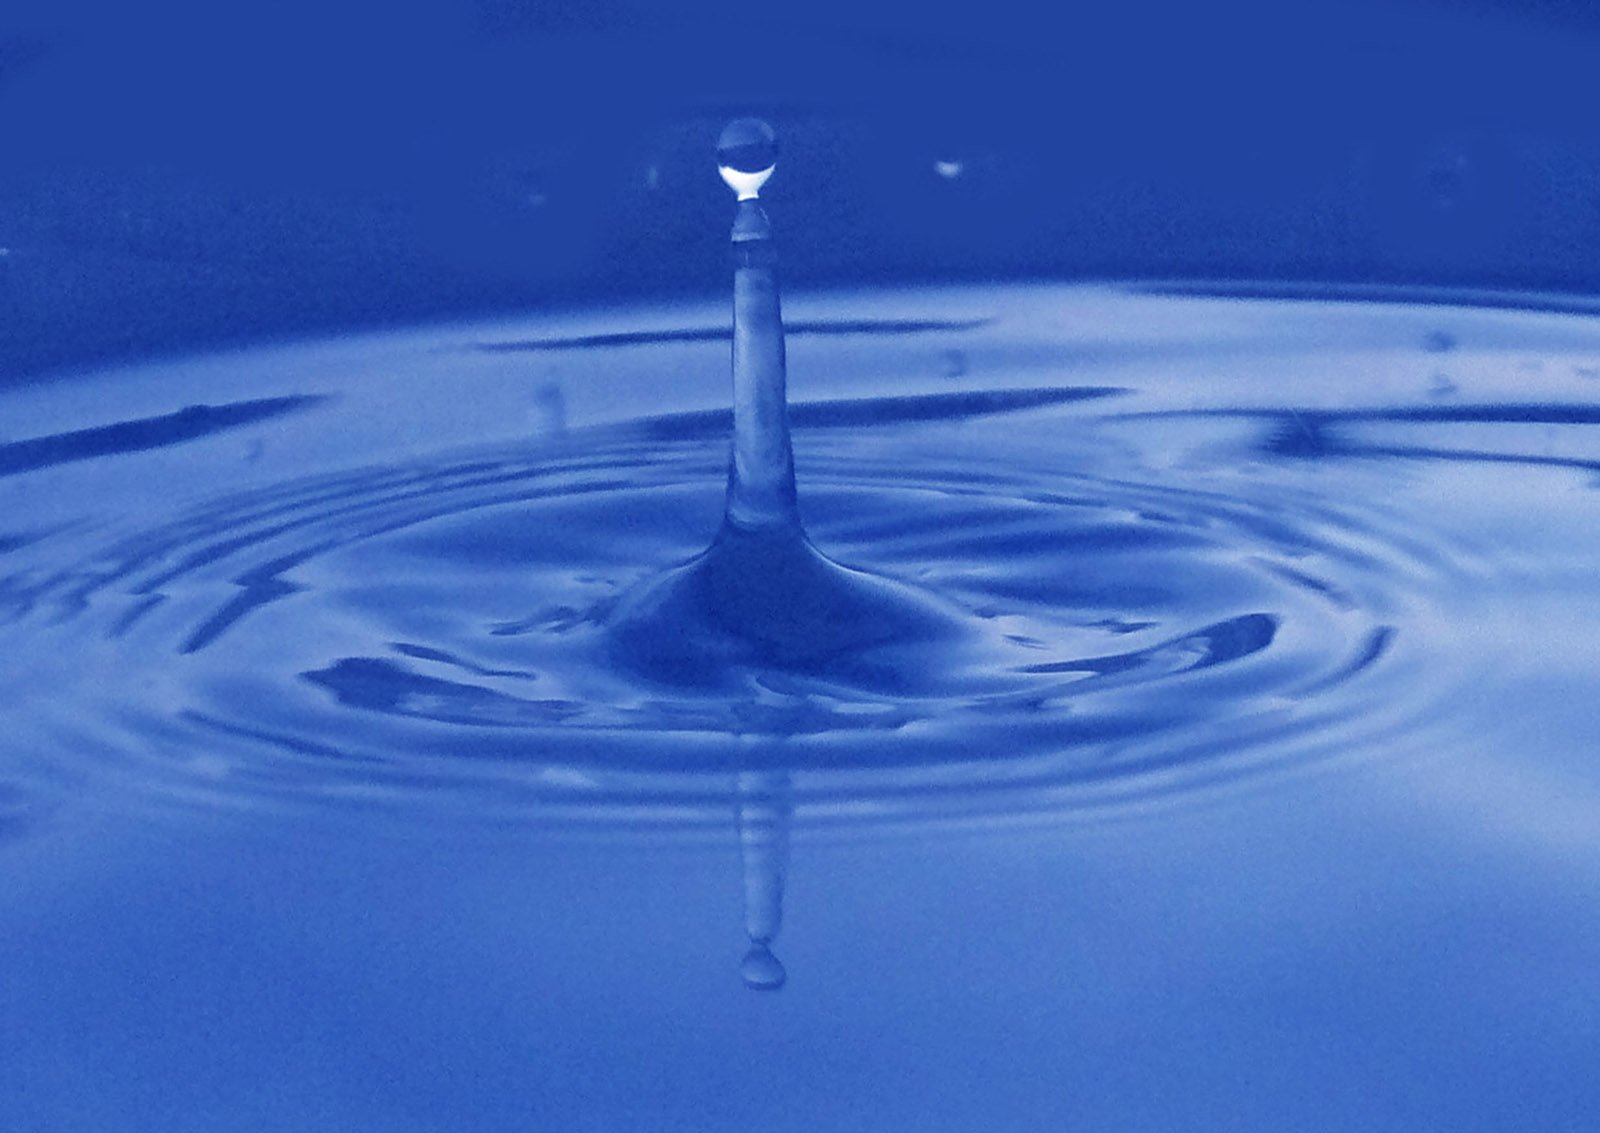 a blue droplet is reflected on the surface of the water